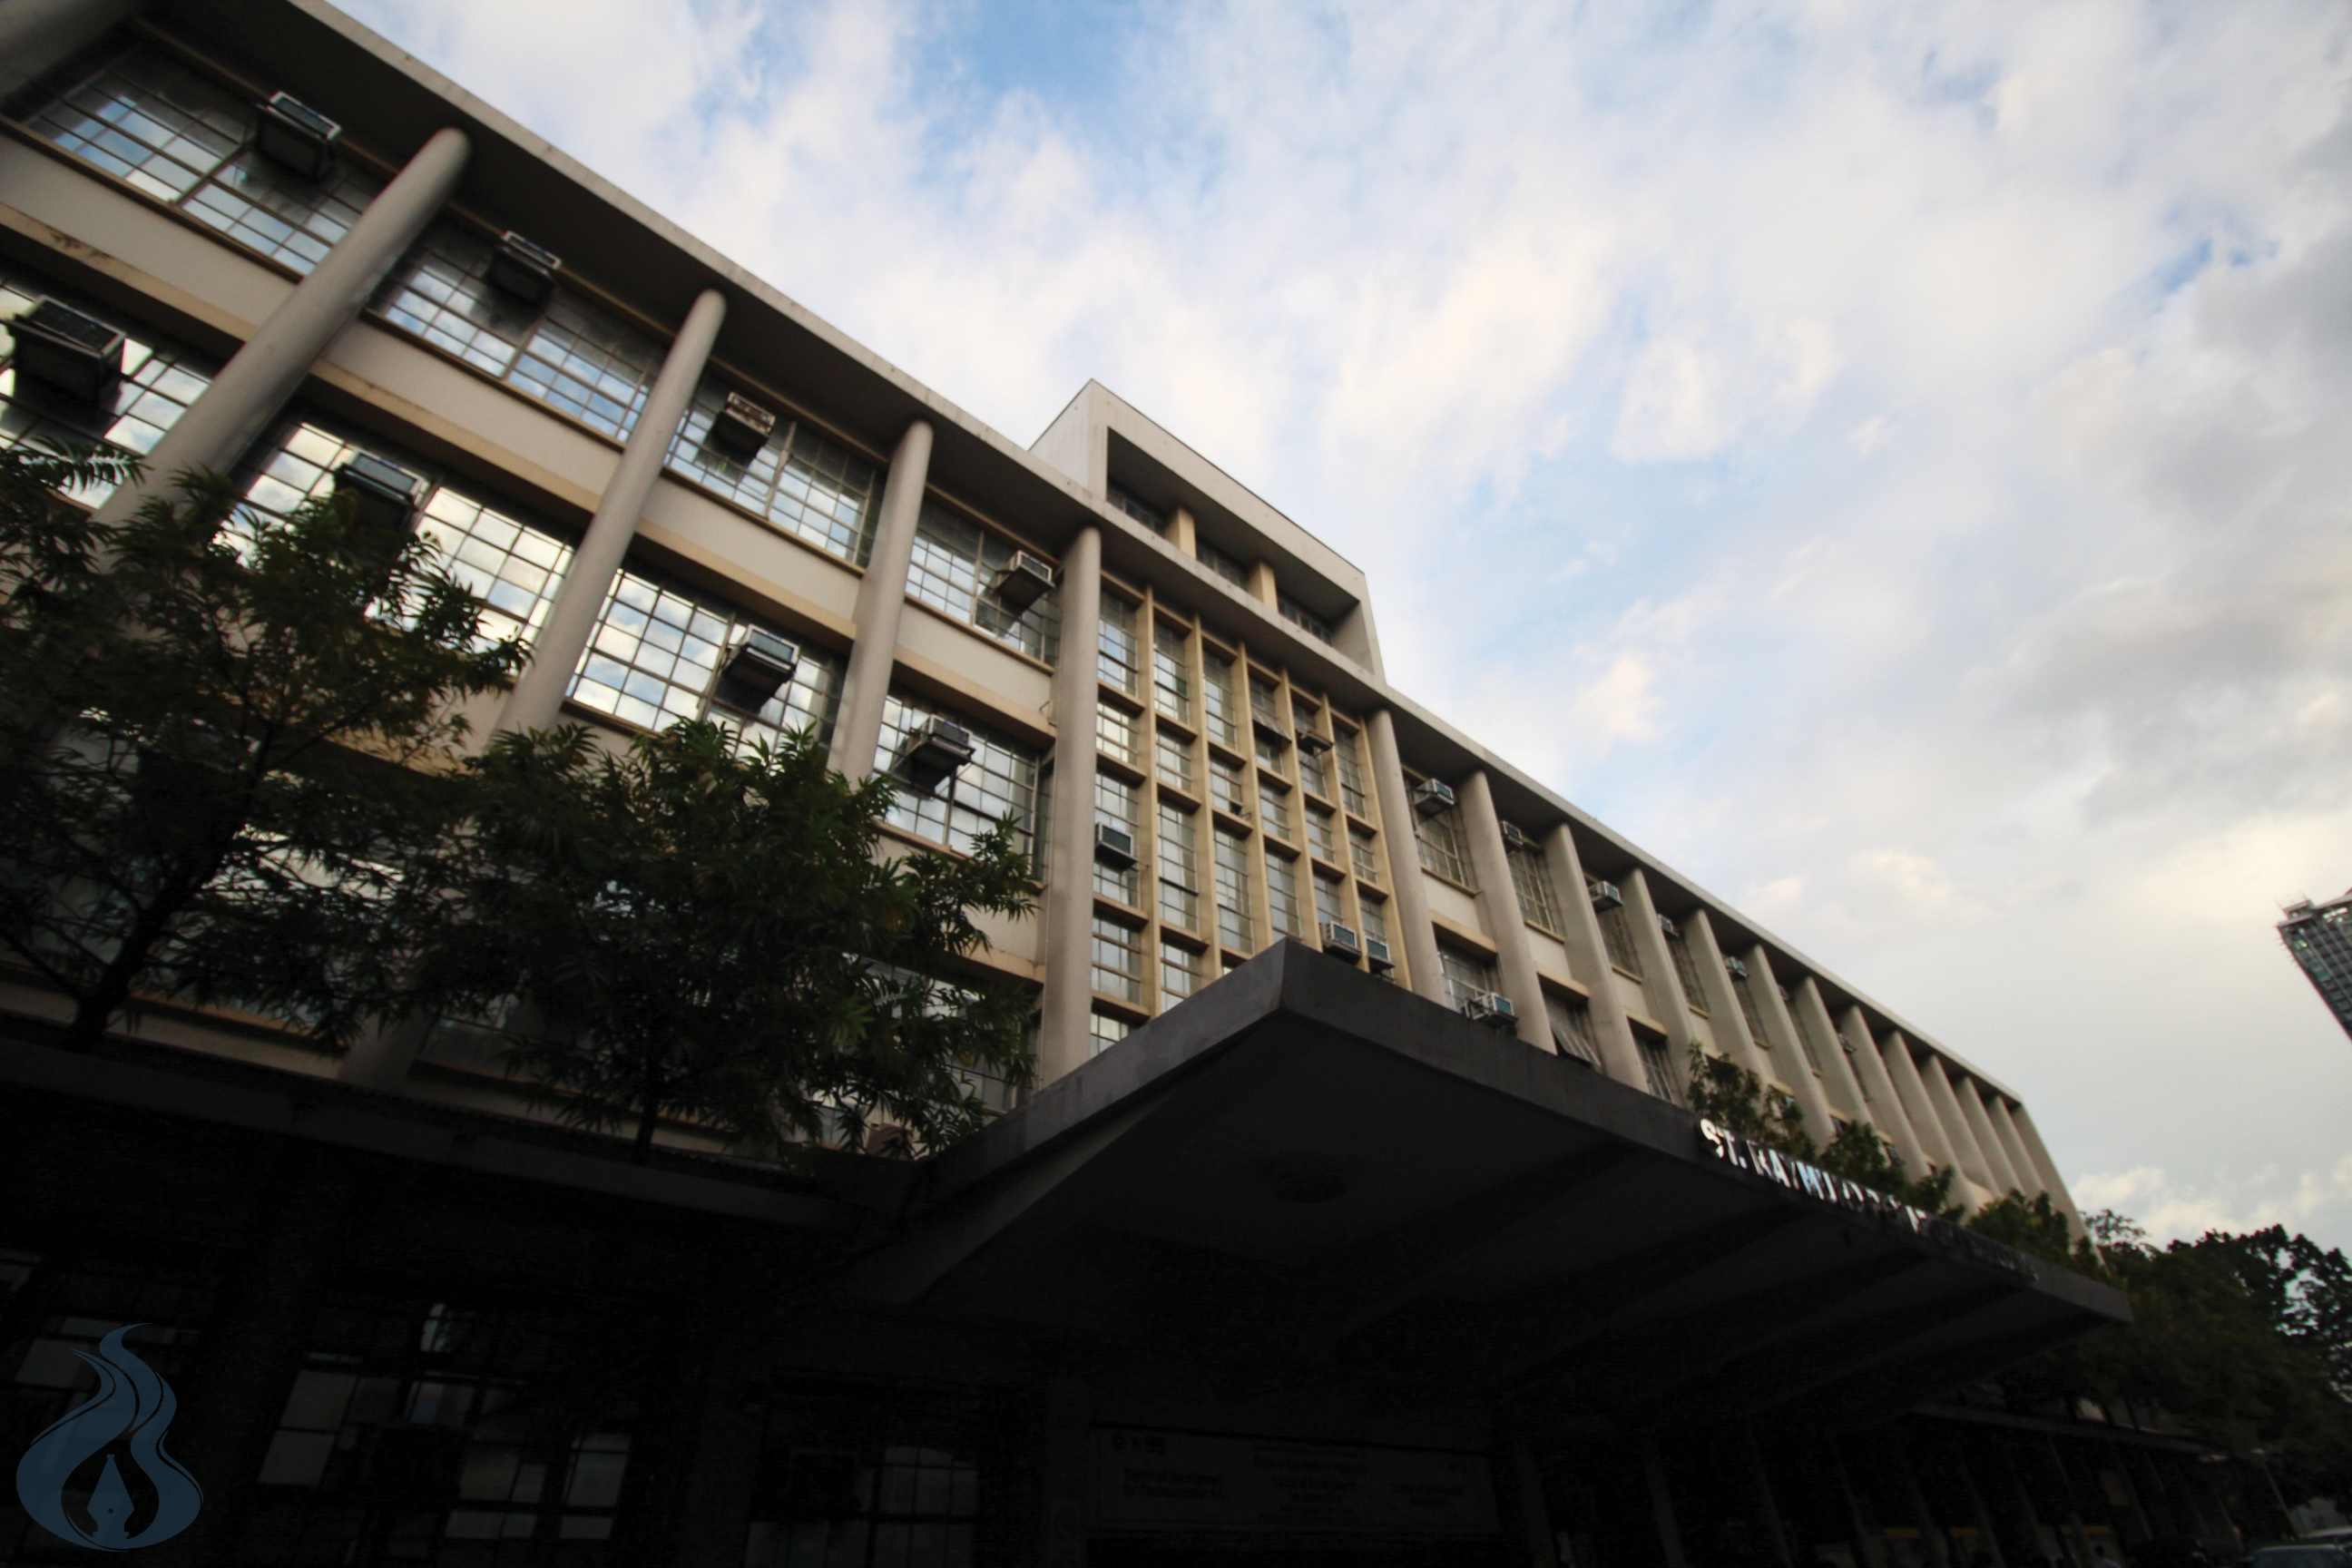 Communication Arts, Journalism to be prioritized in face-to-face classes, says Artlets Dean